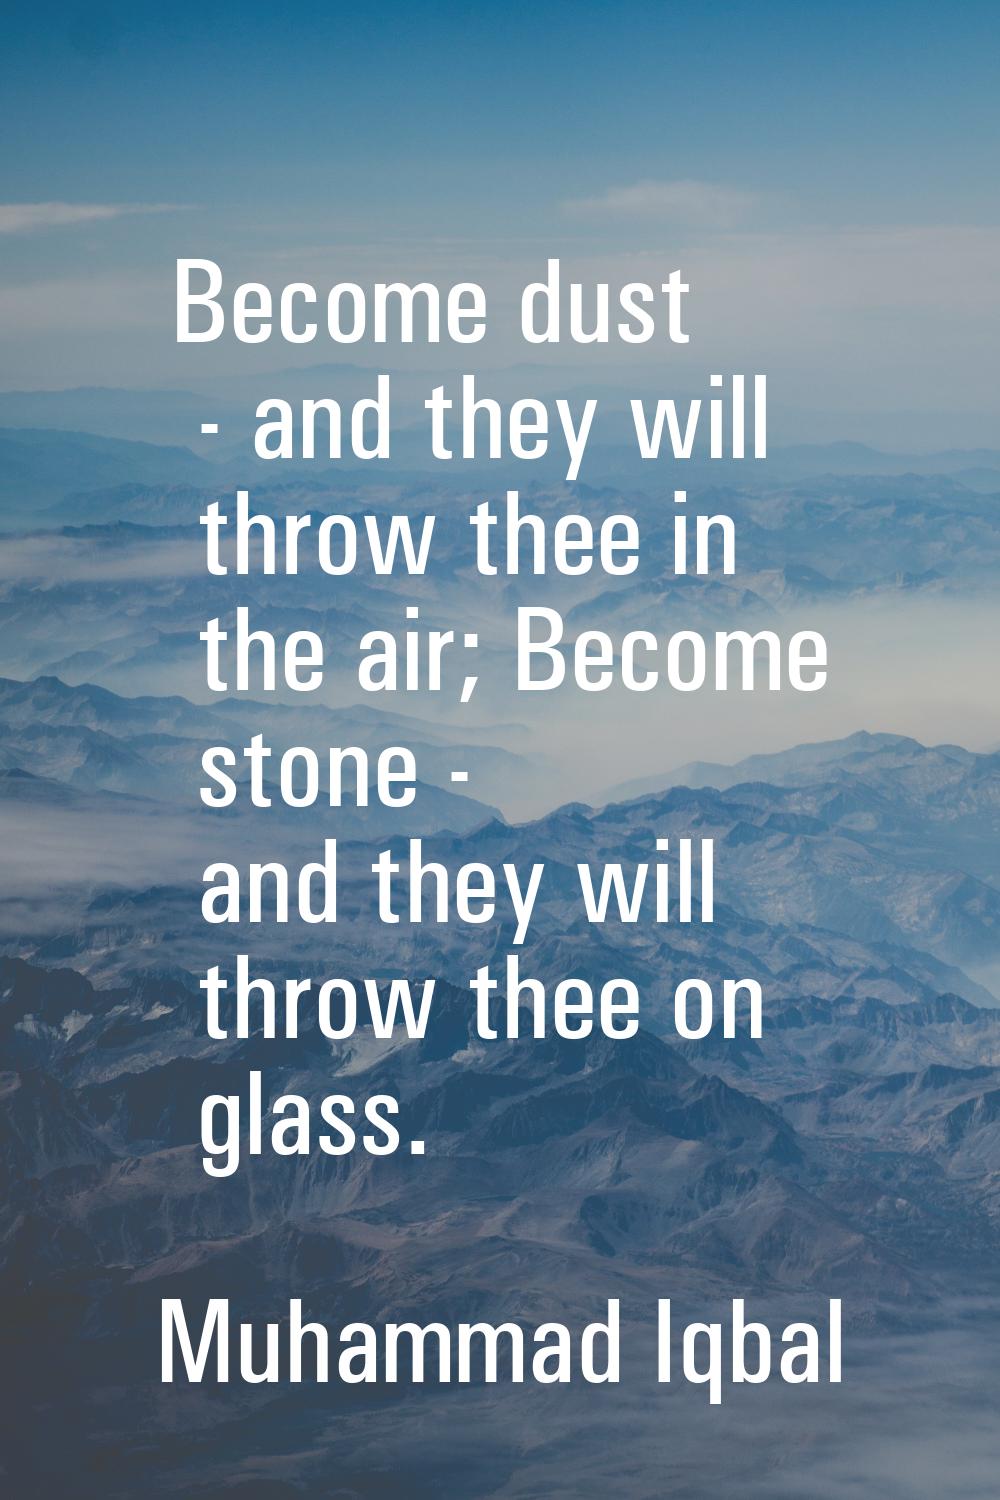 Become dust - and they will throw thee in the air; Become stone - and they will throw thee on glass